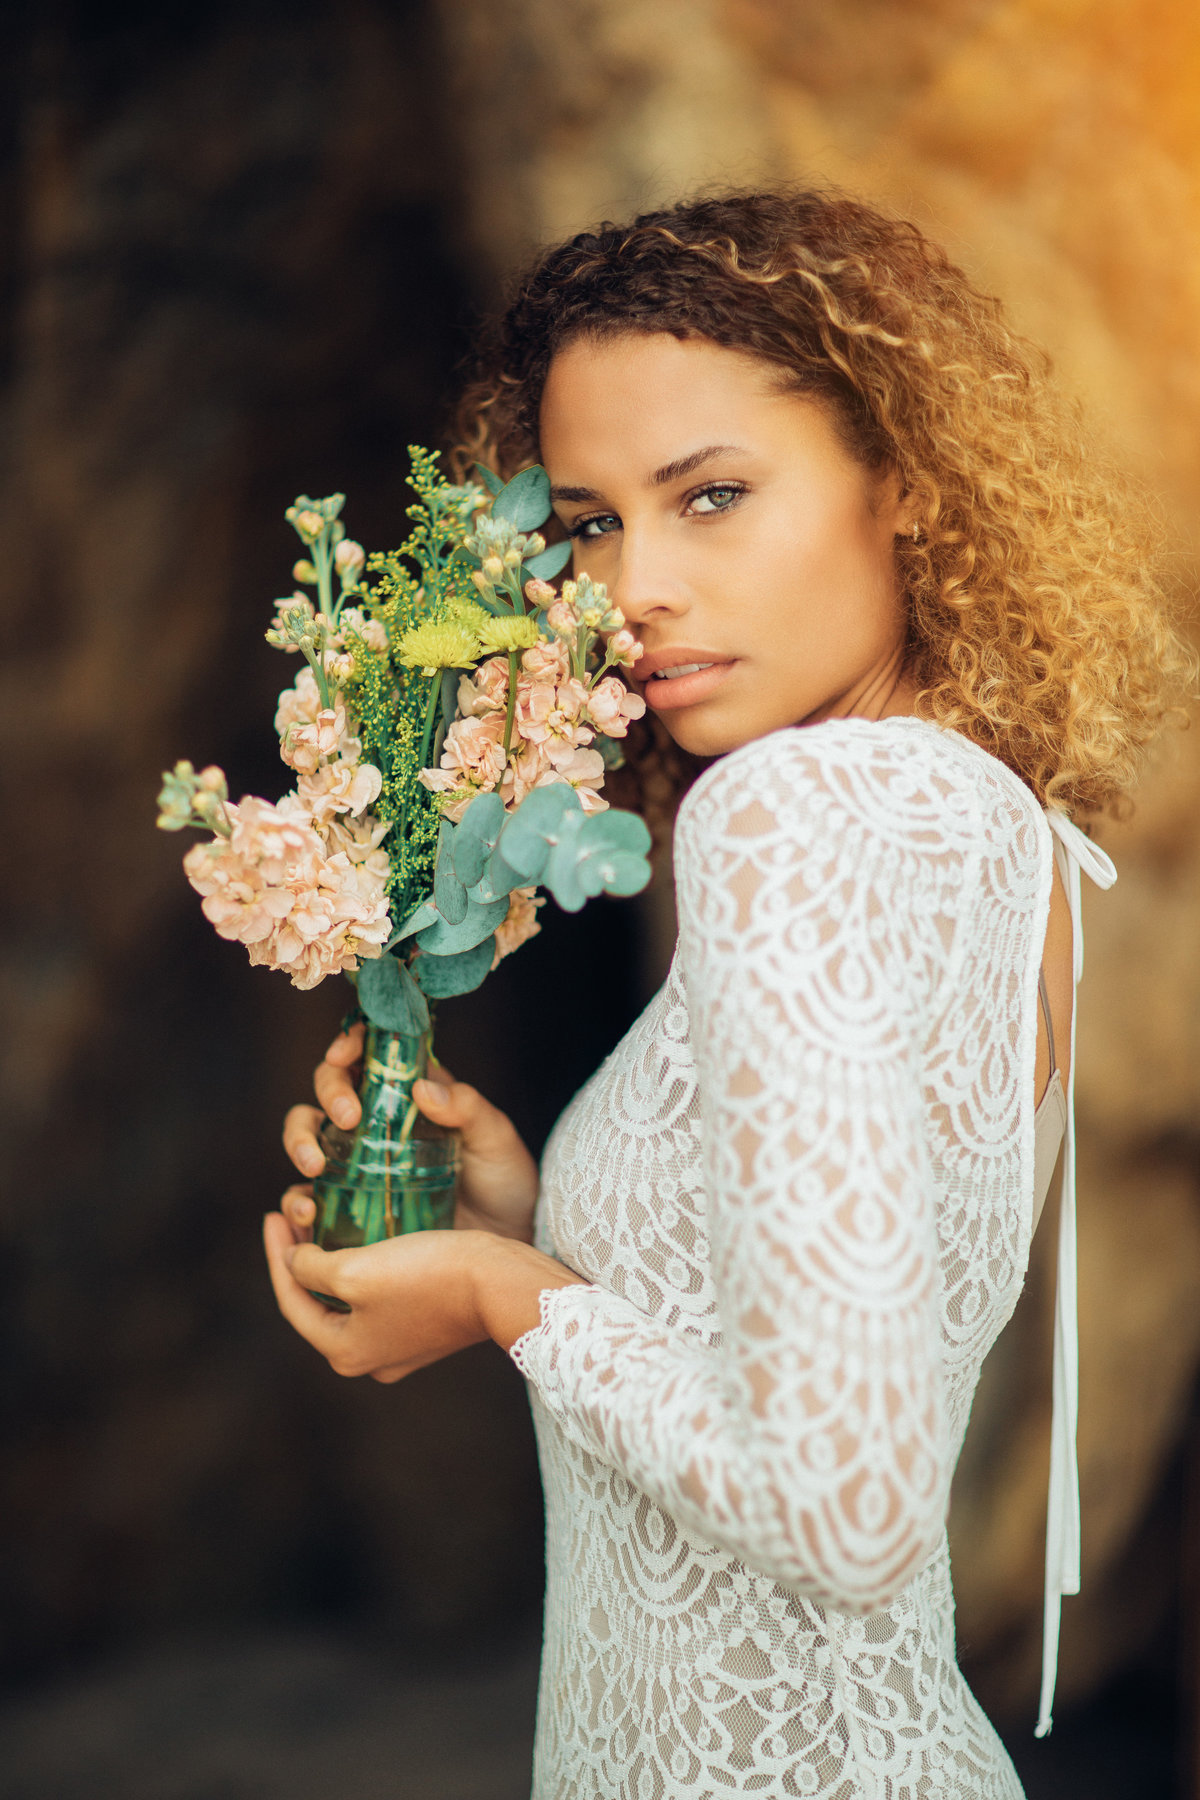 Portrait Photo Of Young Black Woman In White Dress Showing Flowers In a Bottle Los Angeles